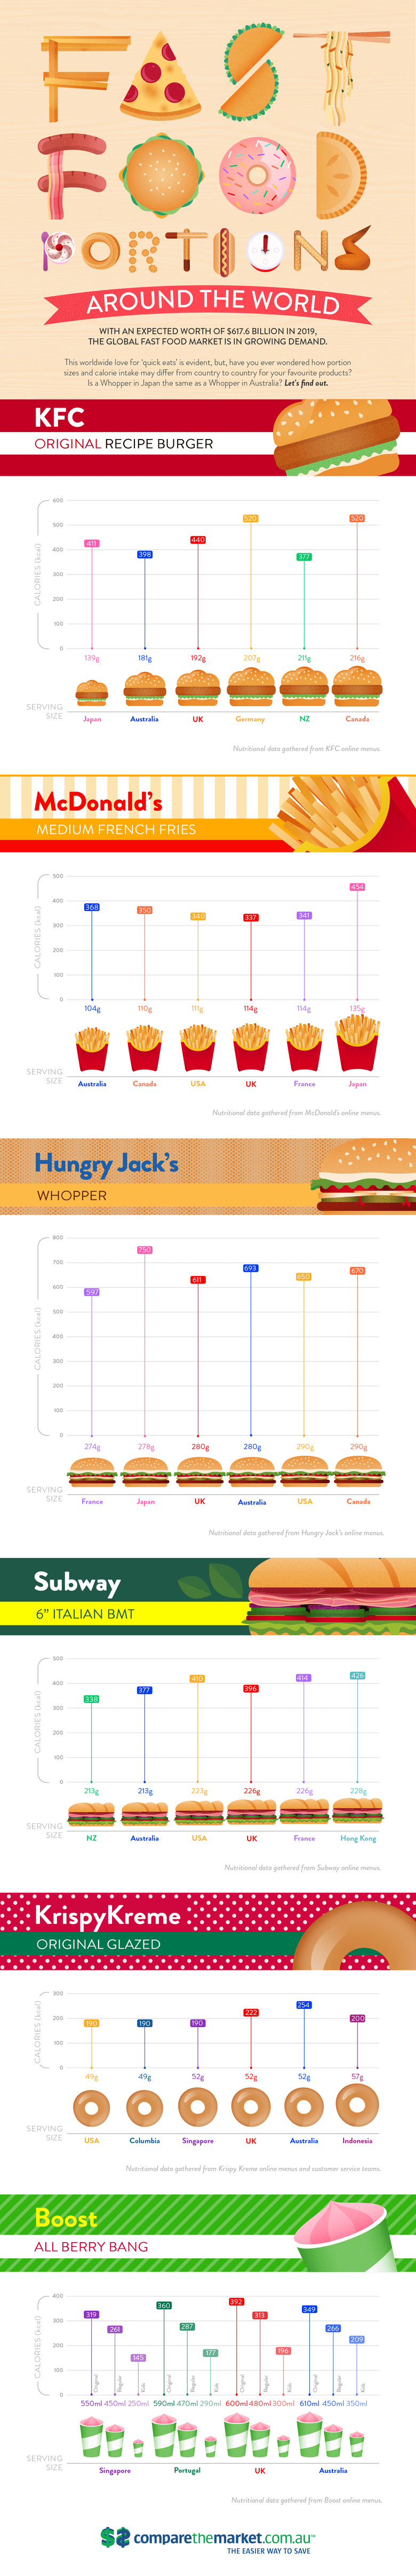 This Fascinating Infographic Compares Fast Food Portion Sizes Around the World